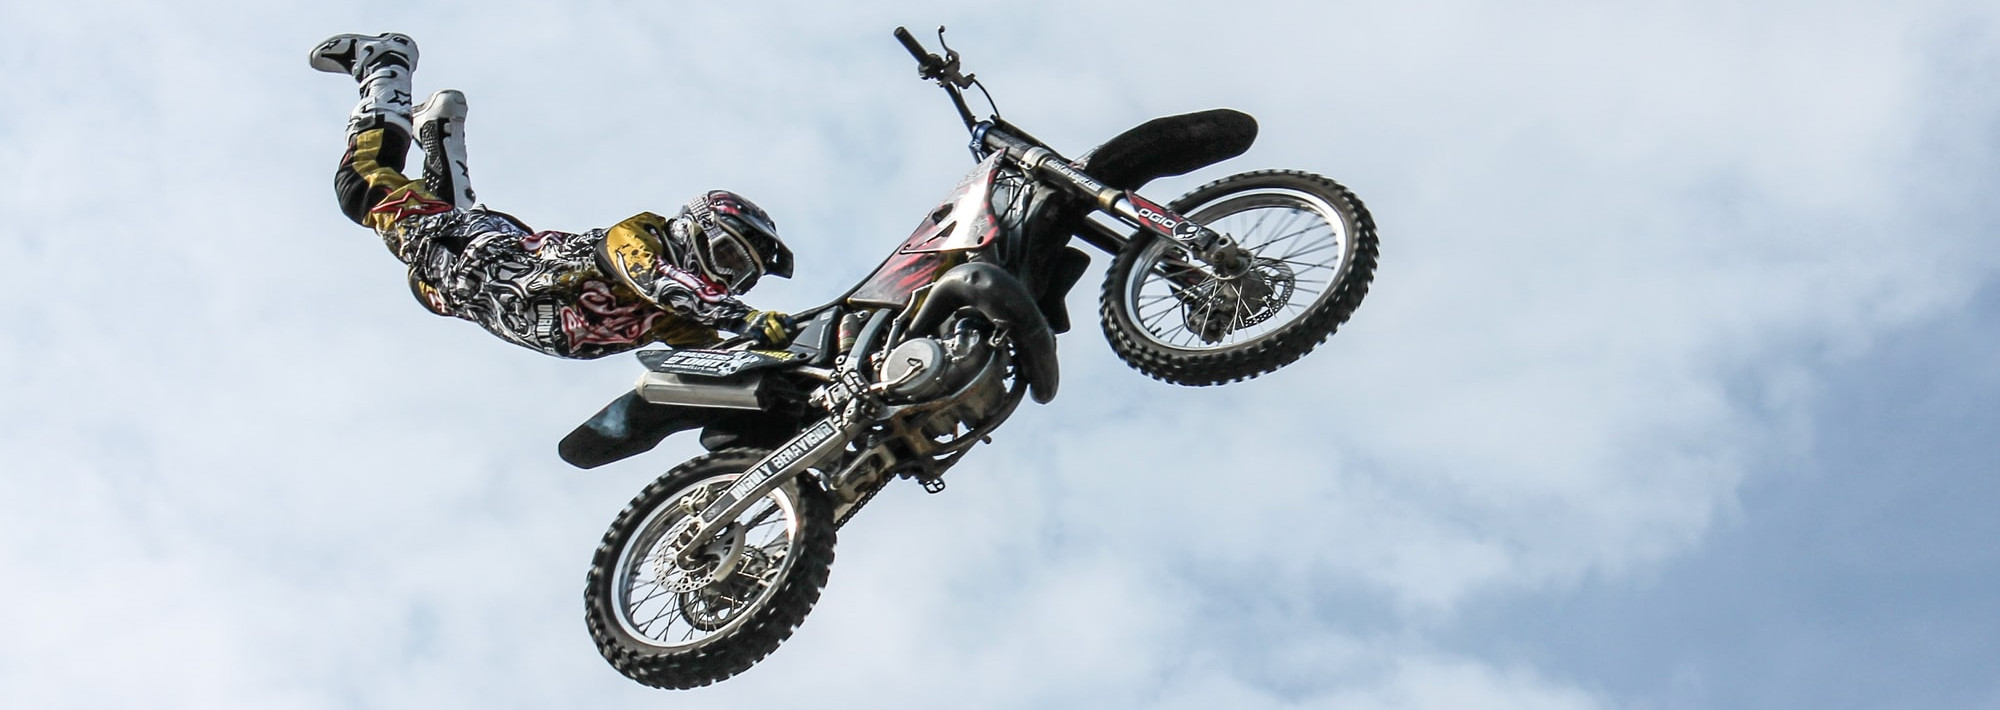 A motocross rider performing an aerial trick.